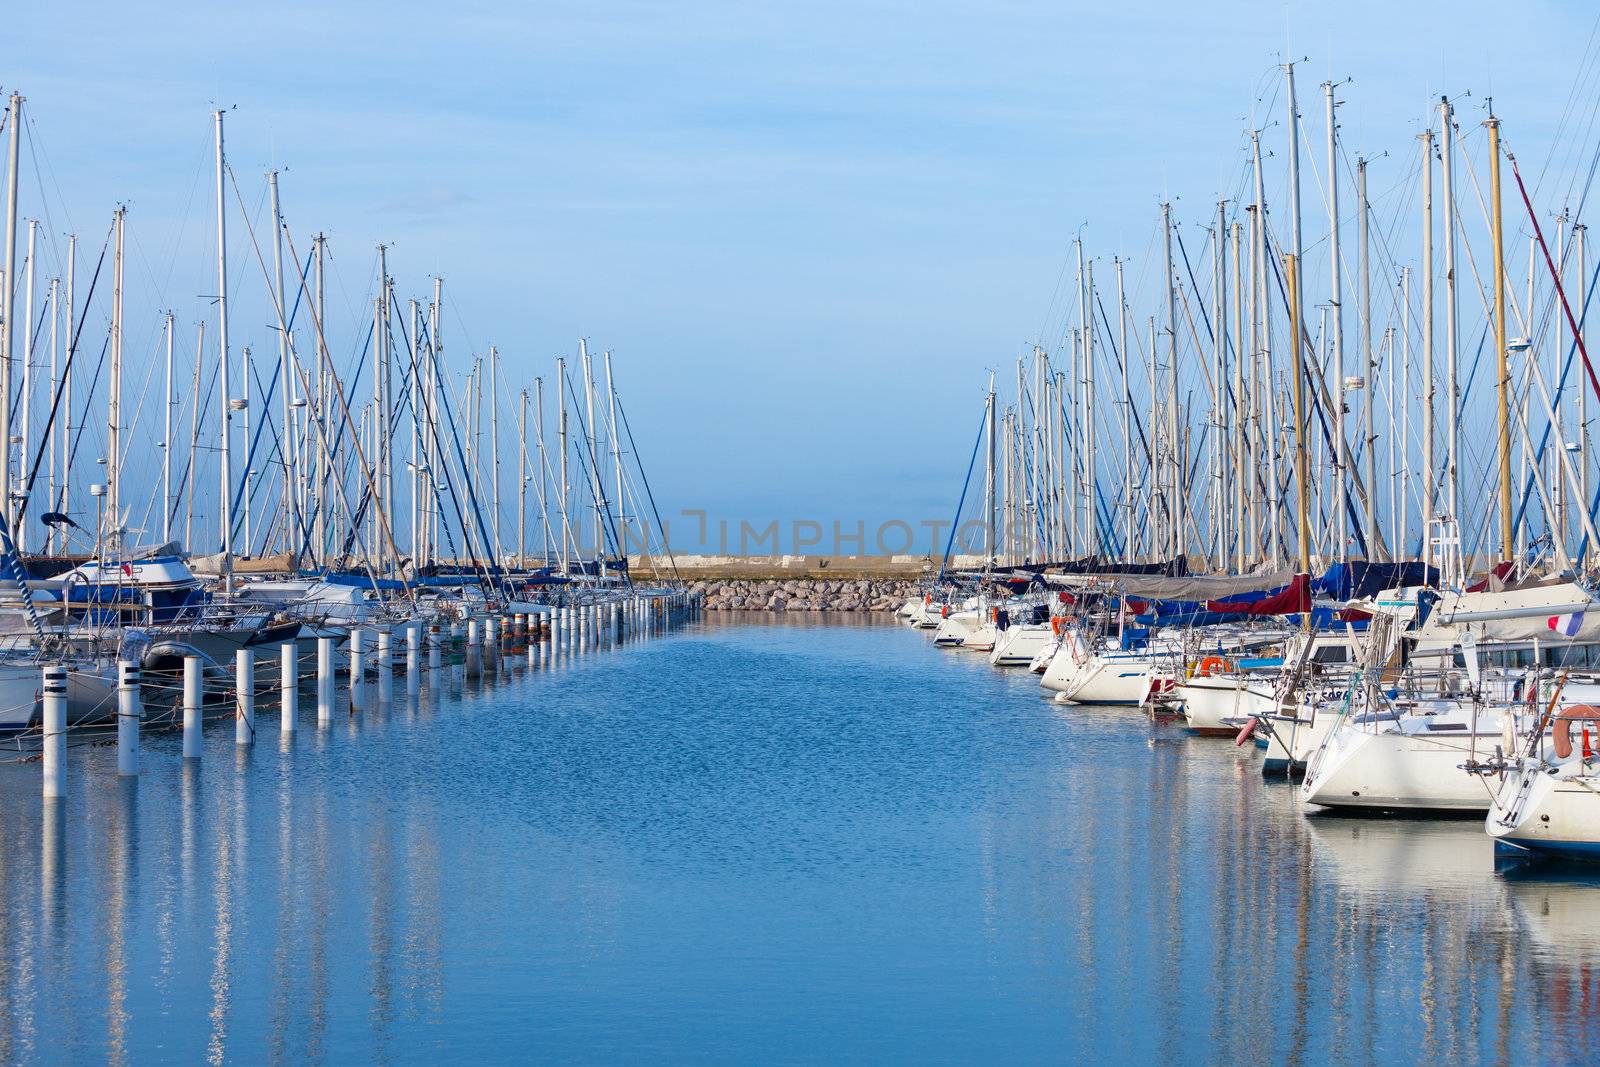 Rows of small luxury pleasure yachts moored in a marina under a sunny blue sky